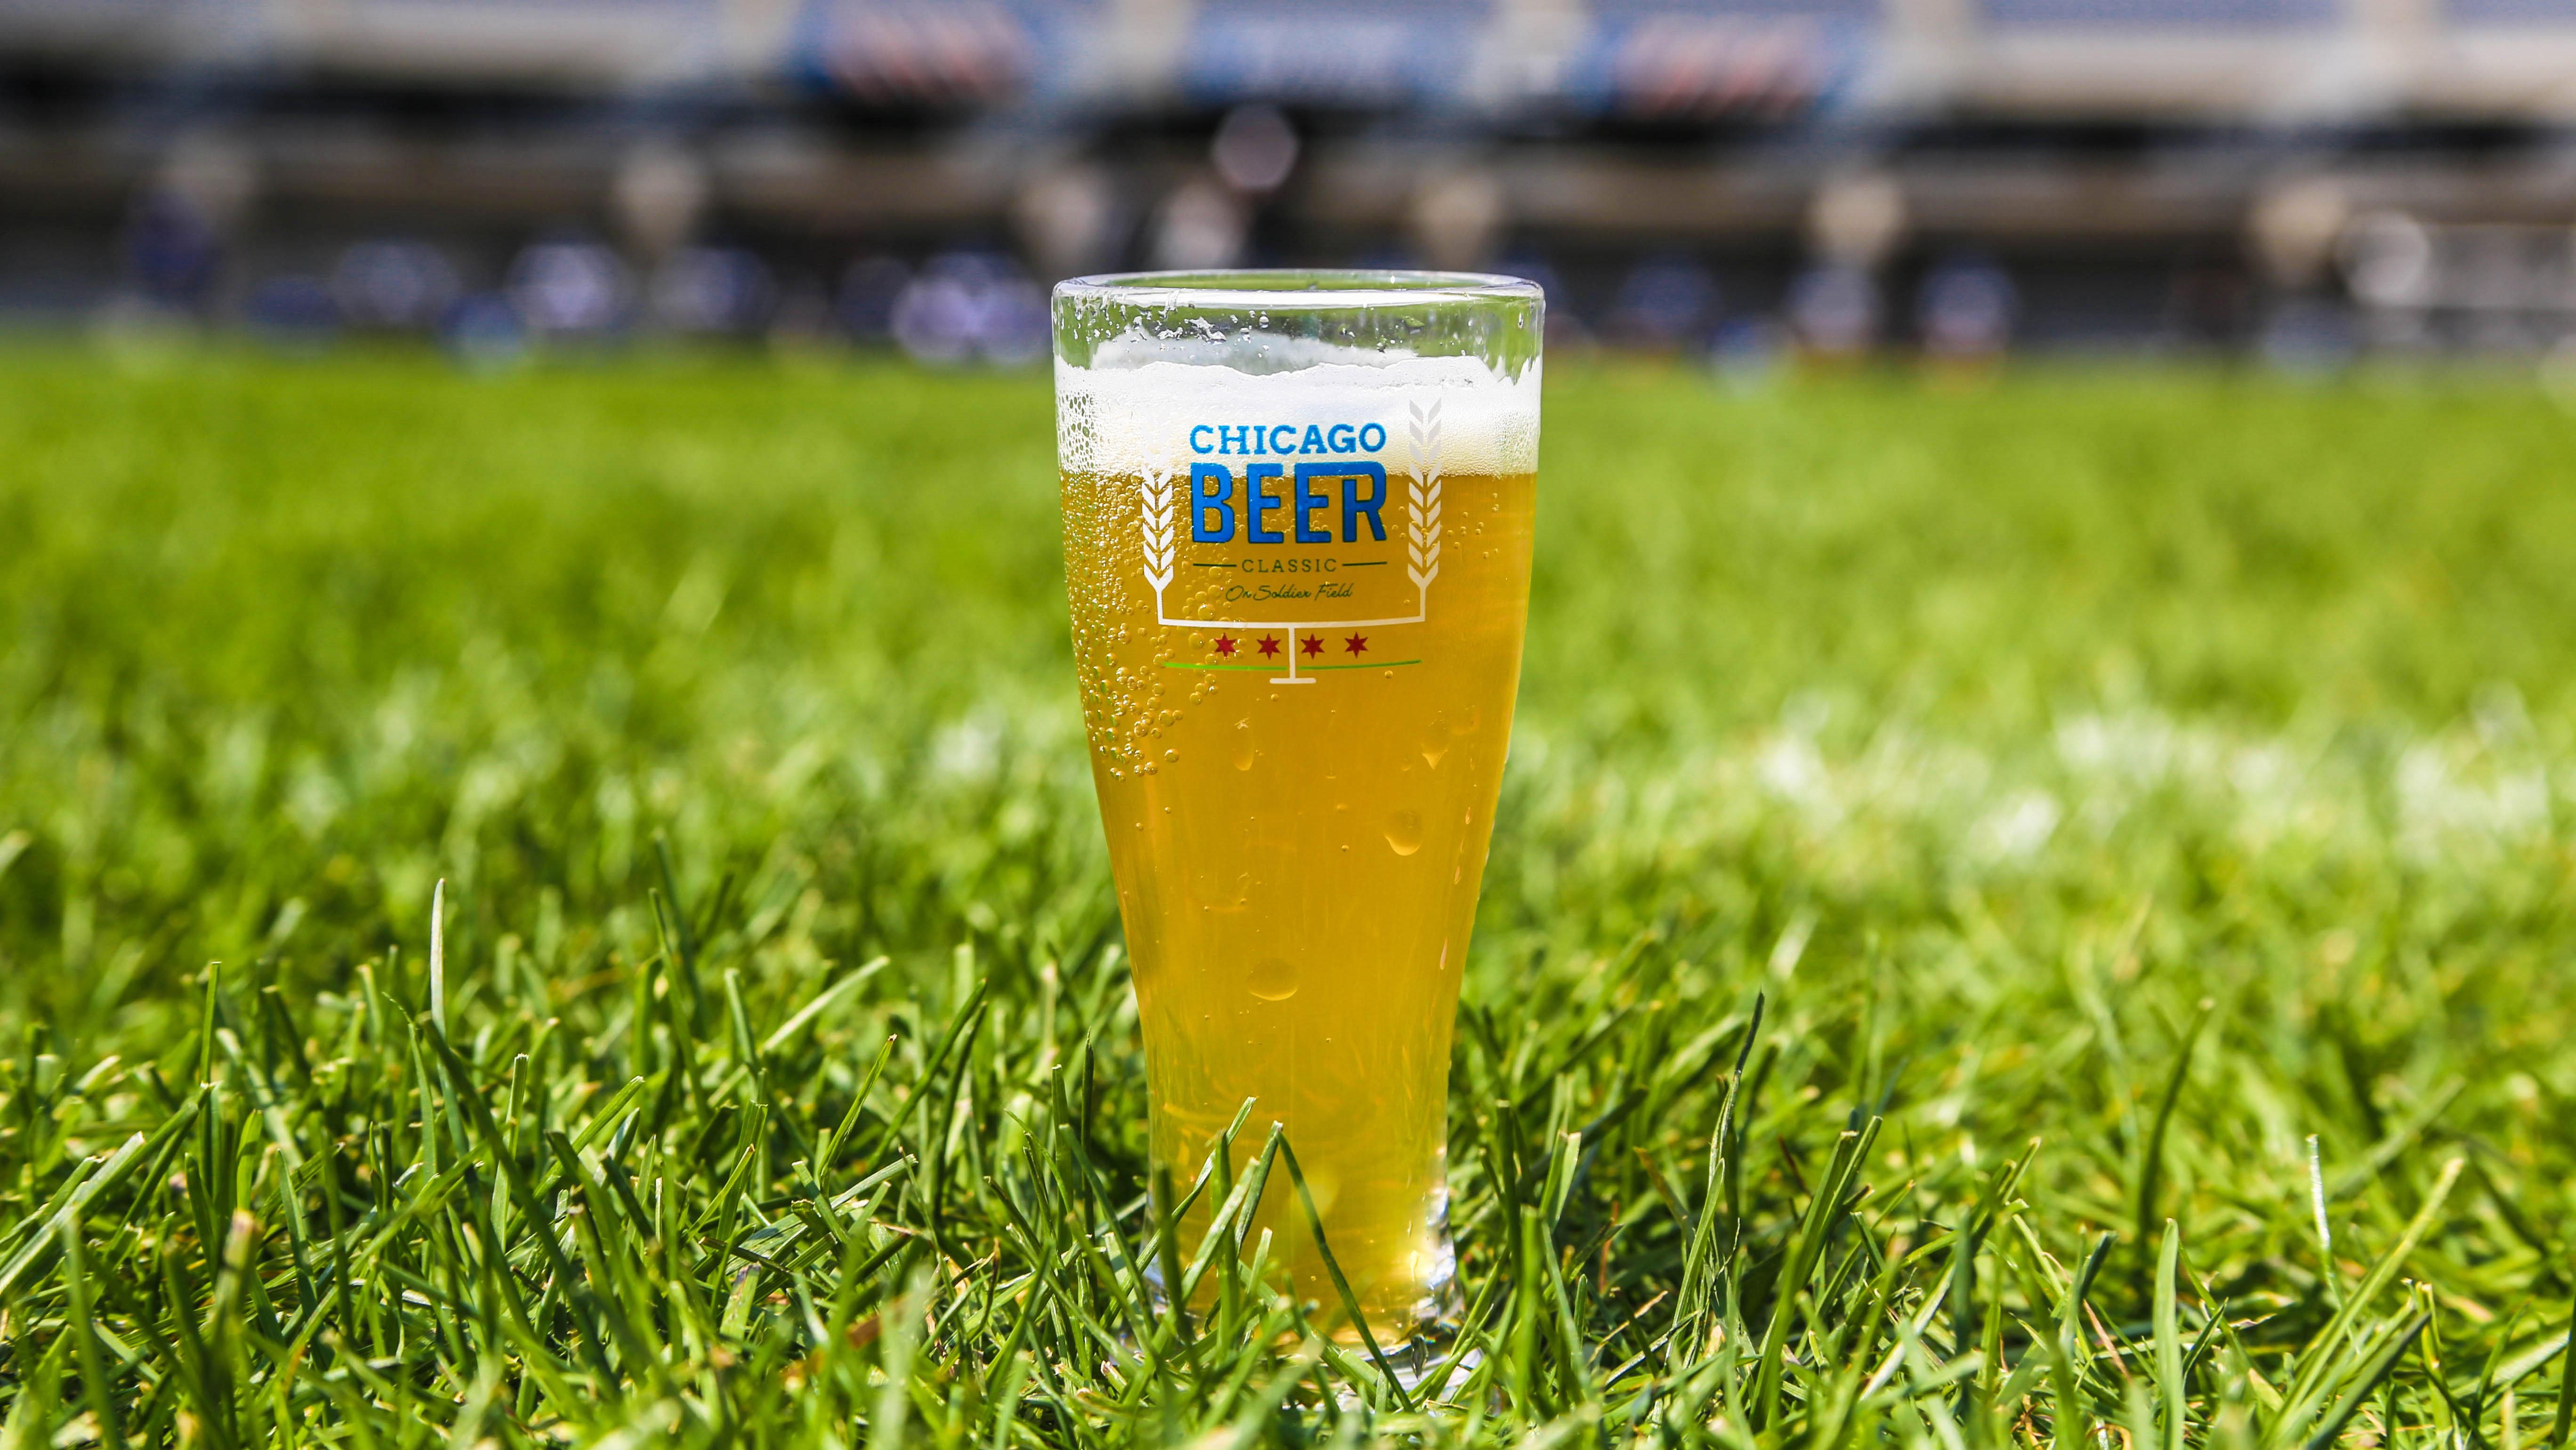 The Chicago Beer Classic hits Soldier Field this weekend. (Courtesy of Red Frog Events)